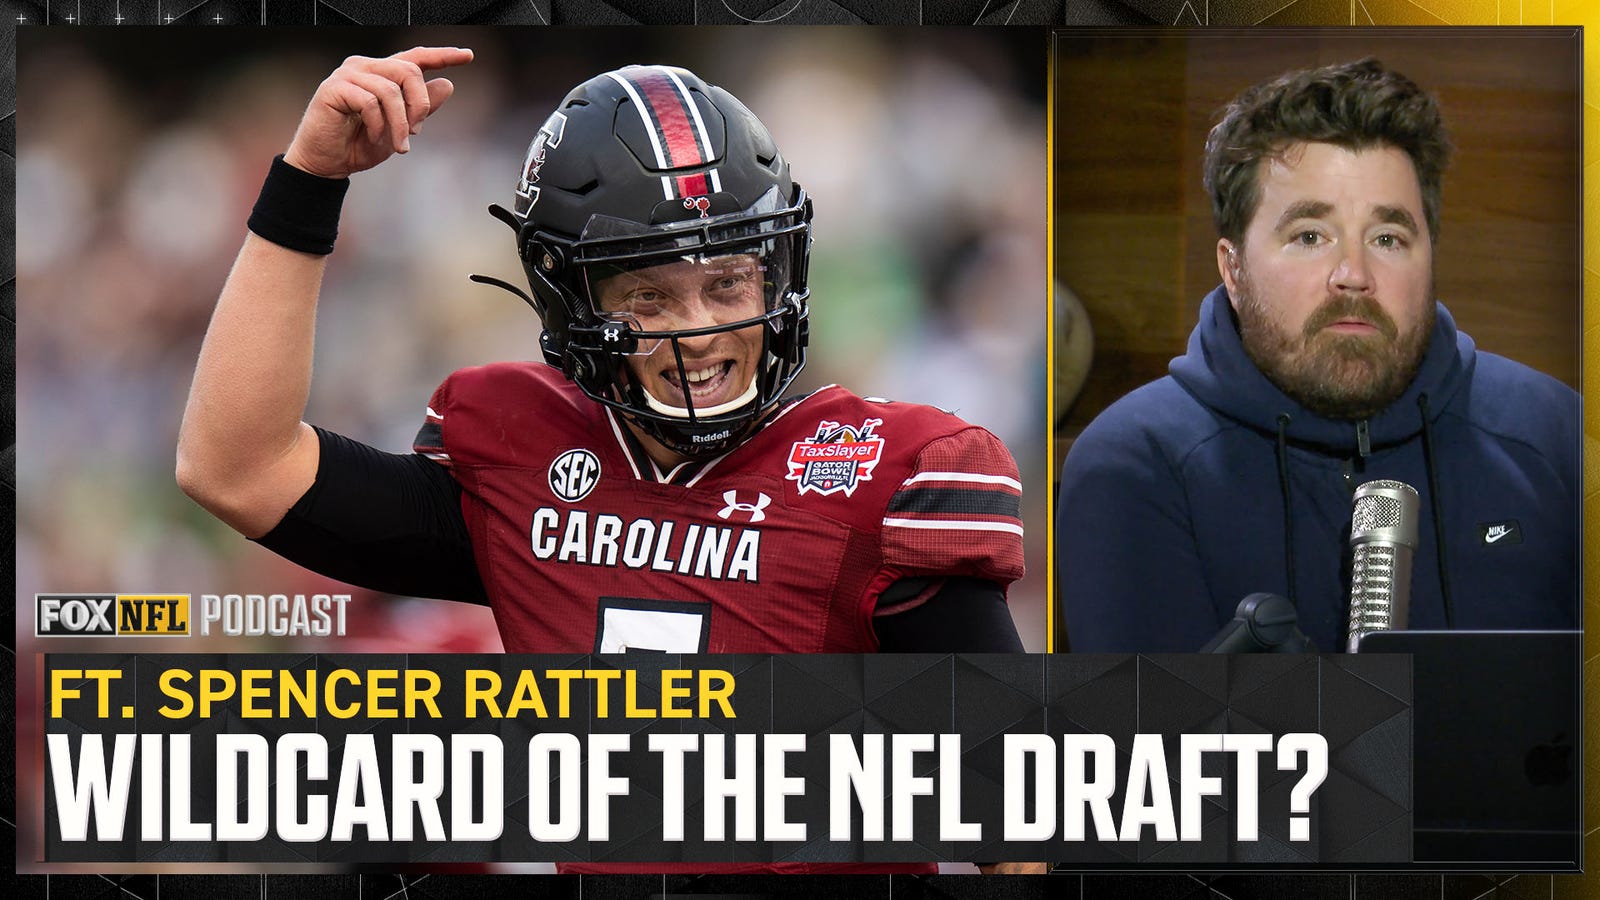 South Carolina QB Spencer Rattler on his stock rising in the draft